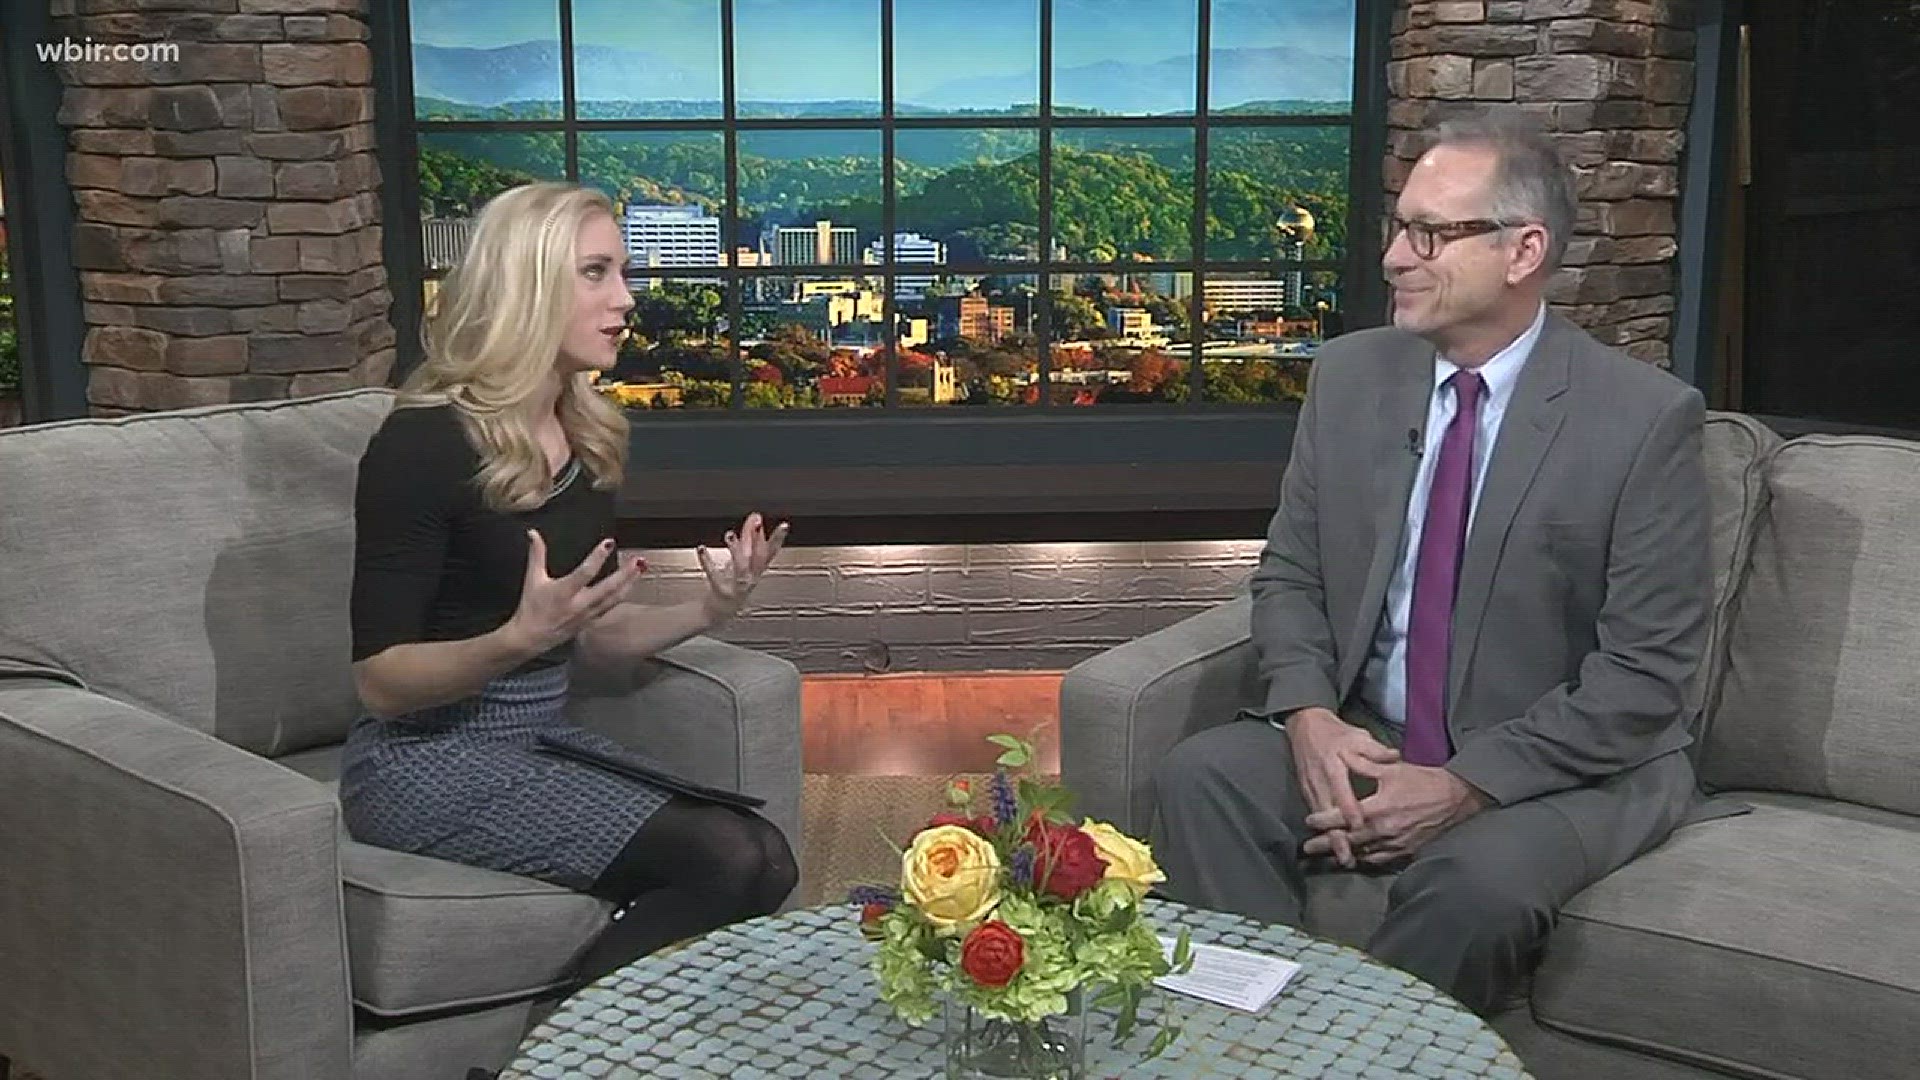 Paul Fain Joins us to talk about saving more to help your financial health in the future.